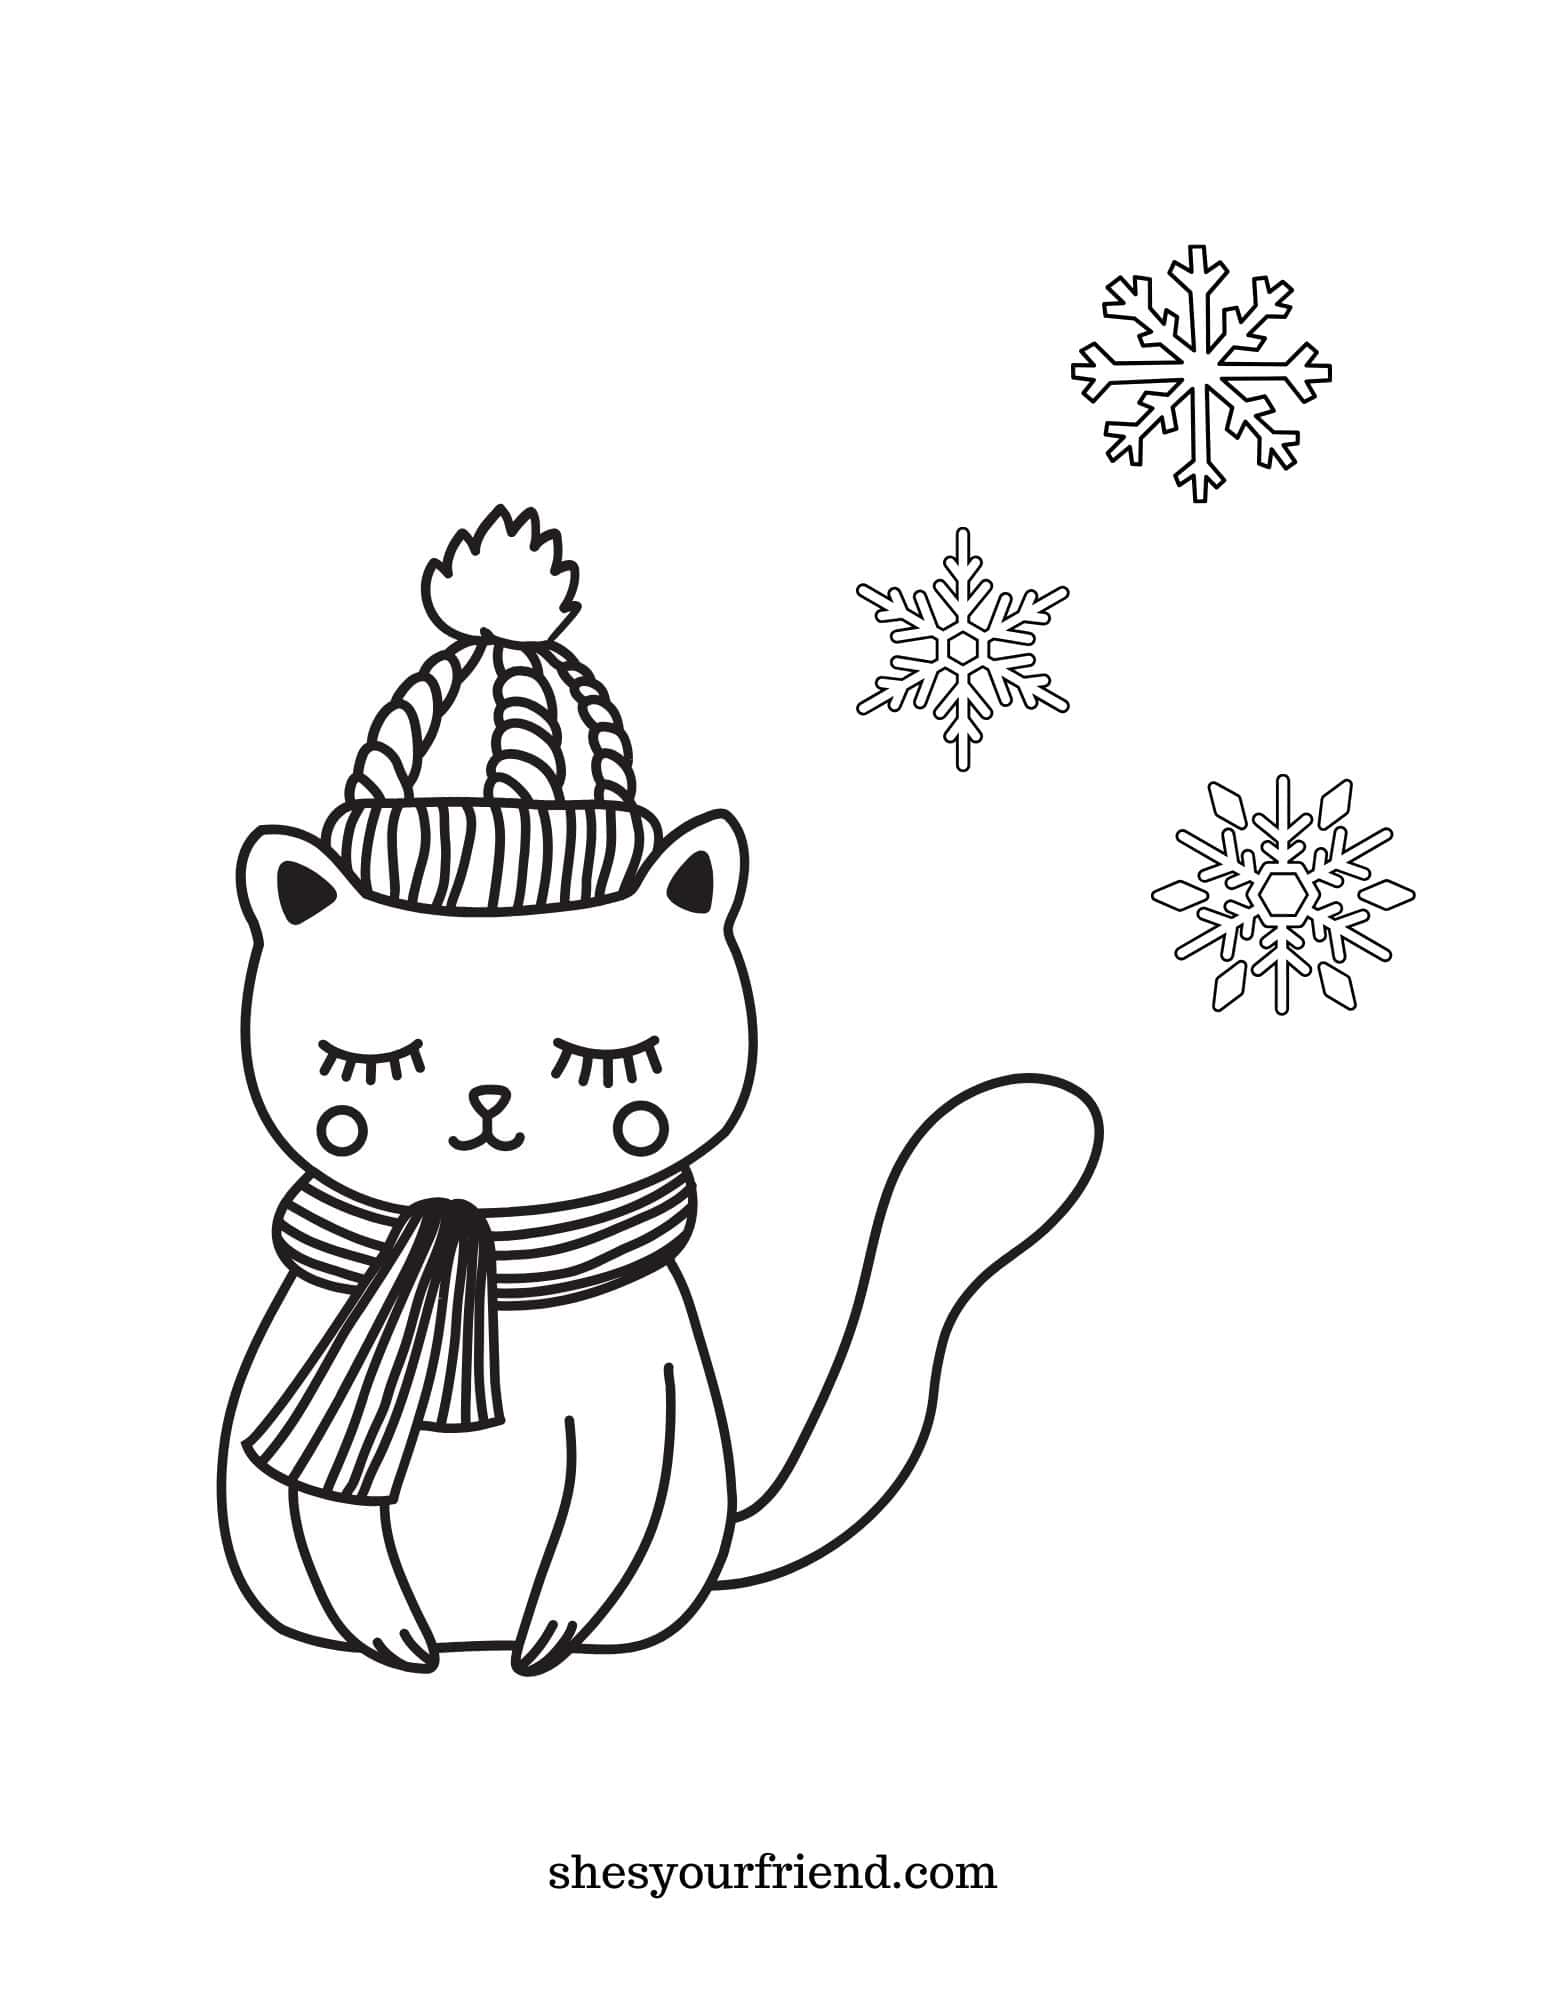 a coloring page with a kitten wearing a hat and scarf and snowflakes nearby